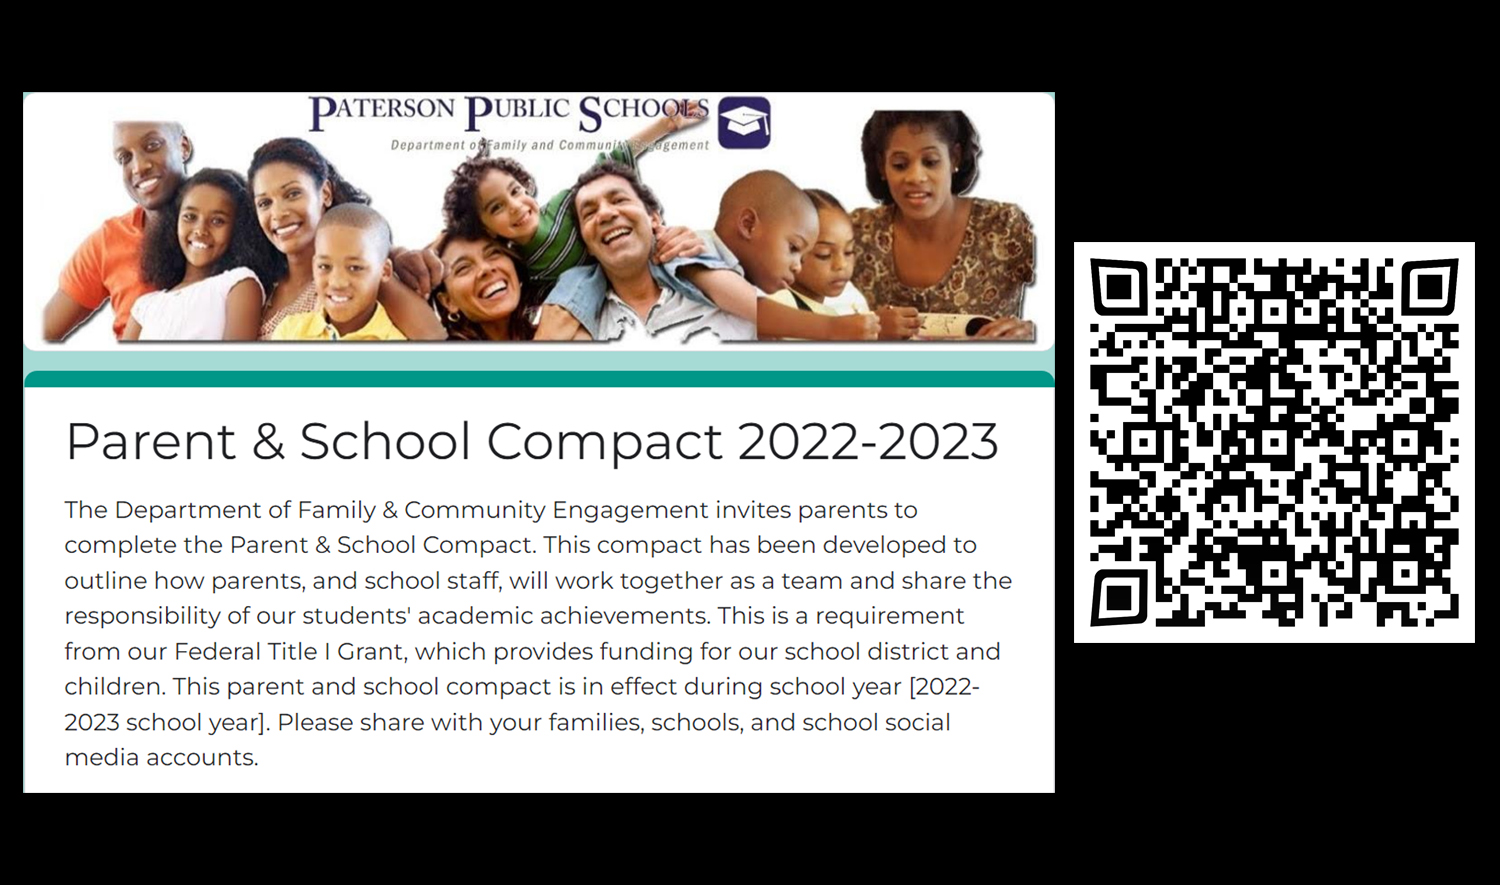 Parent and School Compact. Click to go to page for more info.